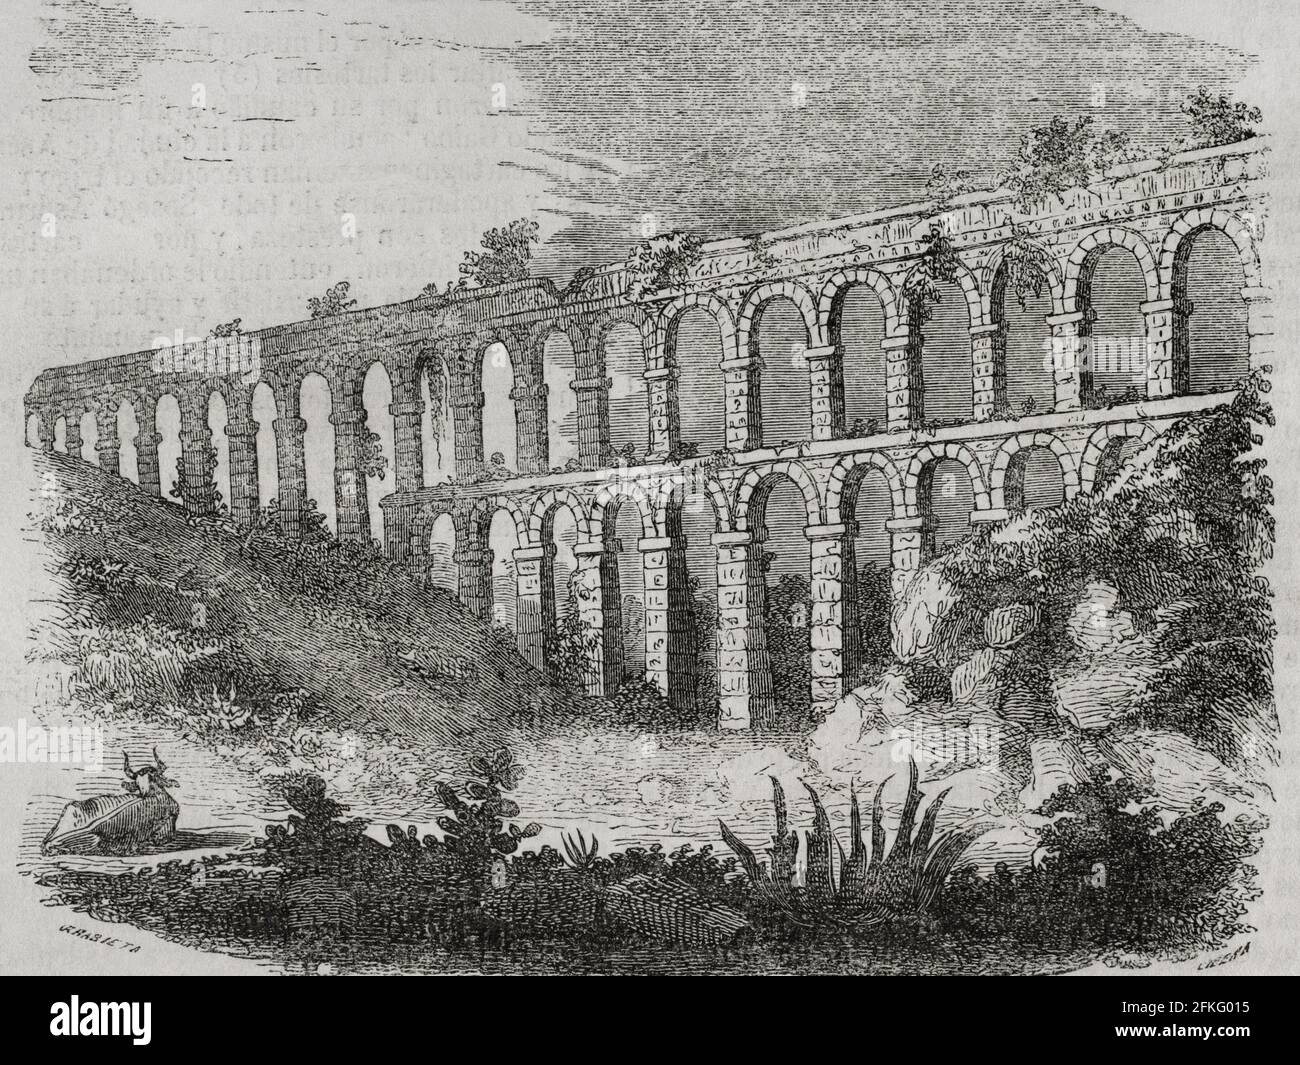 Spain, Catalonia. Aqueduct of Tarragona, also known as the Bridge of Ferreres or Pont del Diable. It was built during the time of Emperor Augustus (63 BC-14 AC) to supply water to the city of Tarragona, from the nearby river Francolí. Illustration by Urrabieta. Engraving by Cibera. Historia General de España Father Mariana. Madrid, 1852. Stock Photo